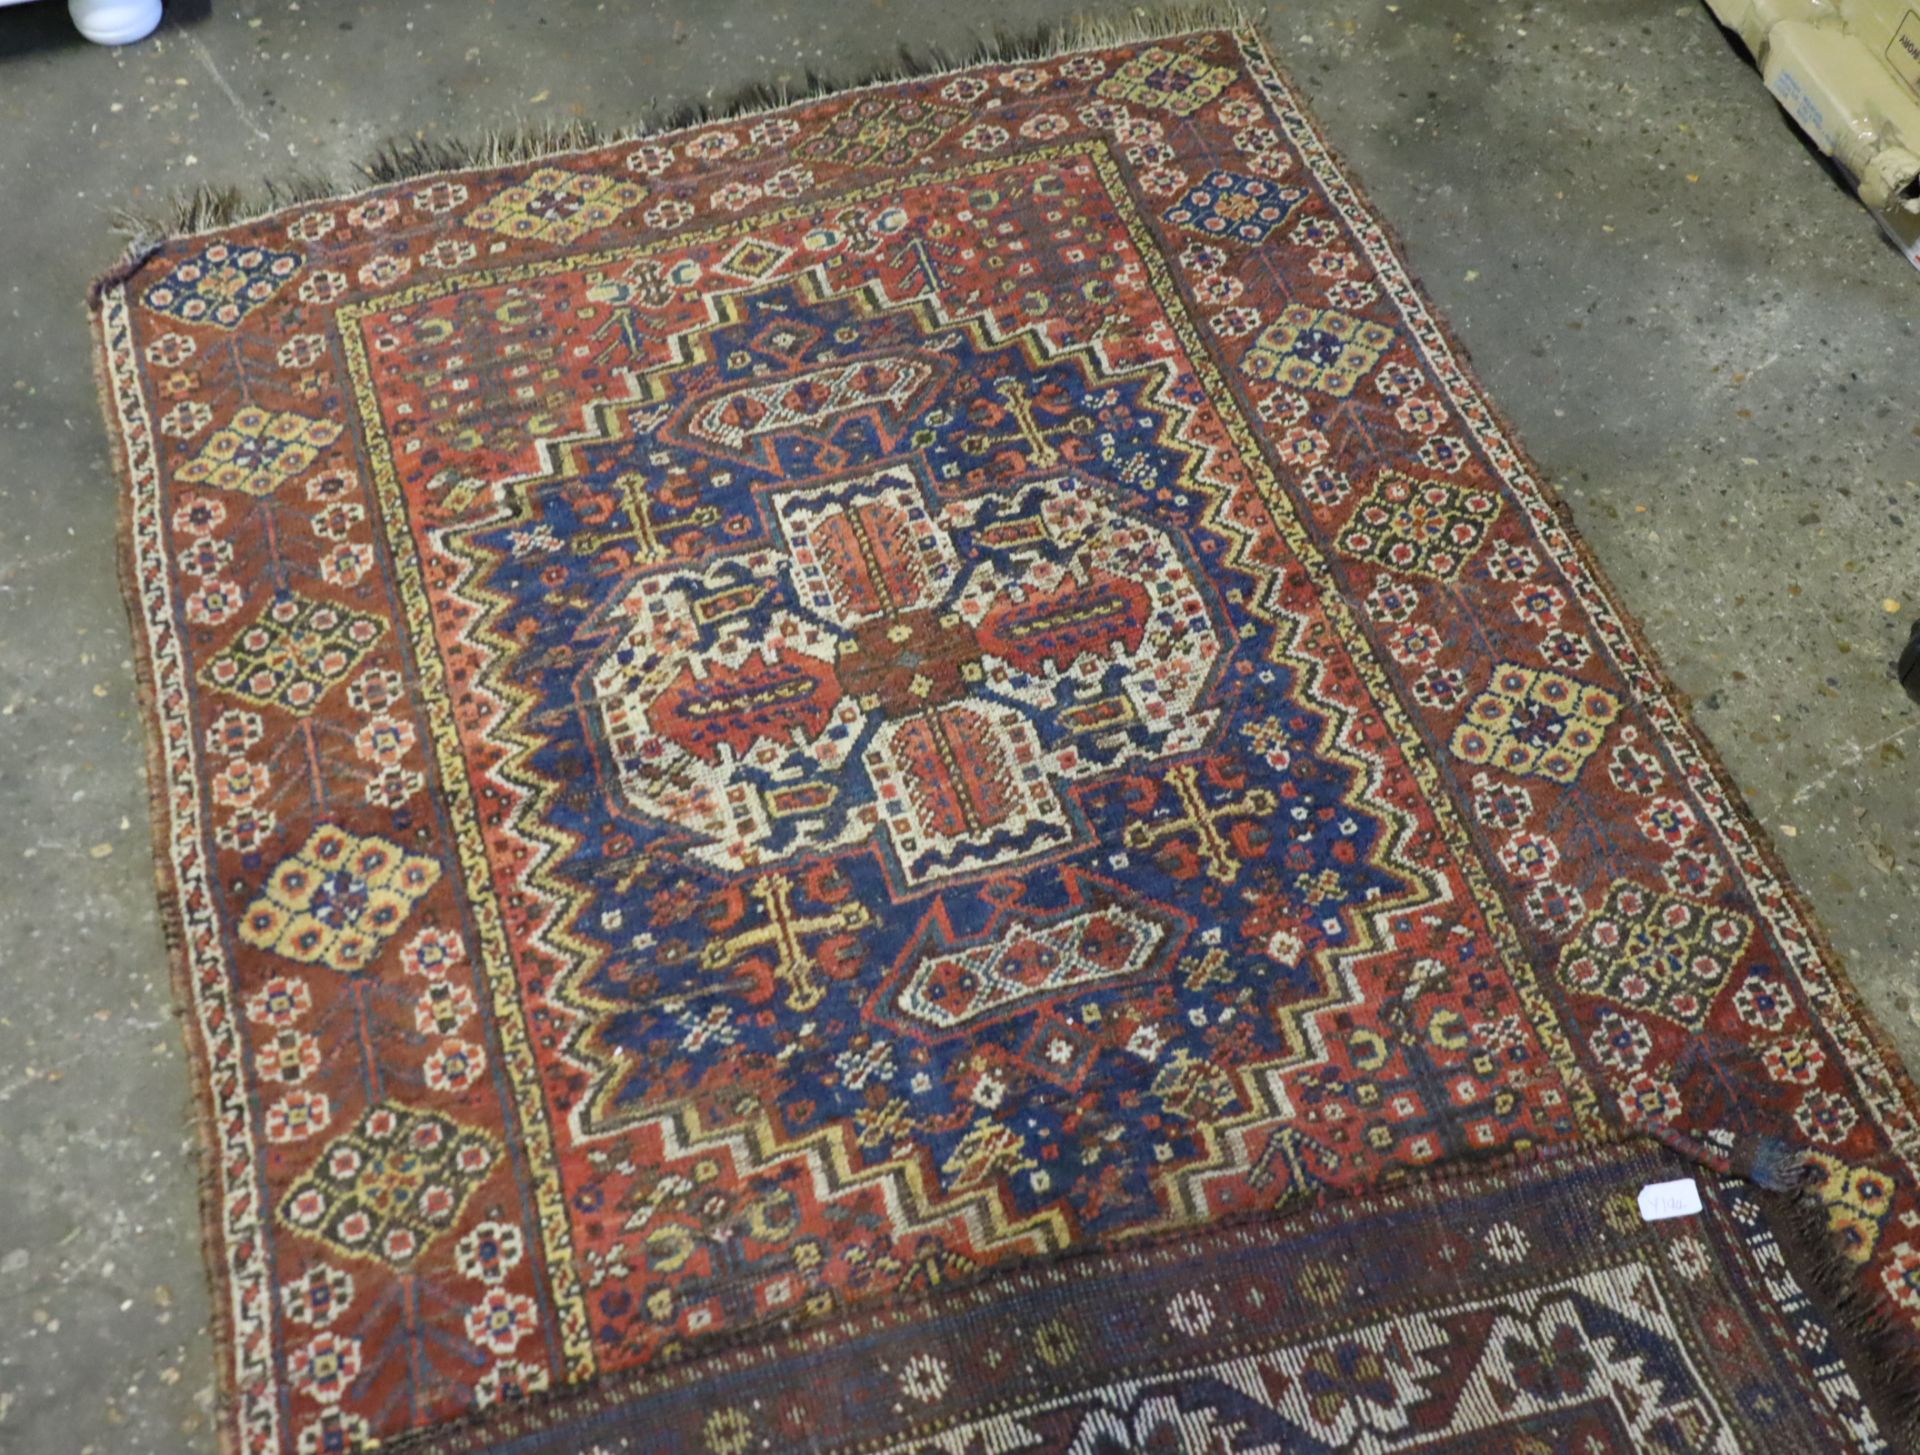 Red, blue and gold Middle Eastern style rug